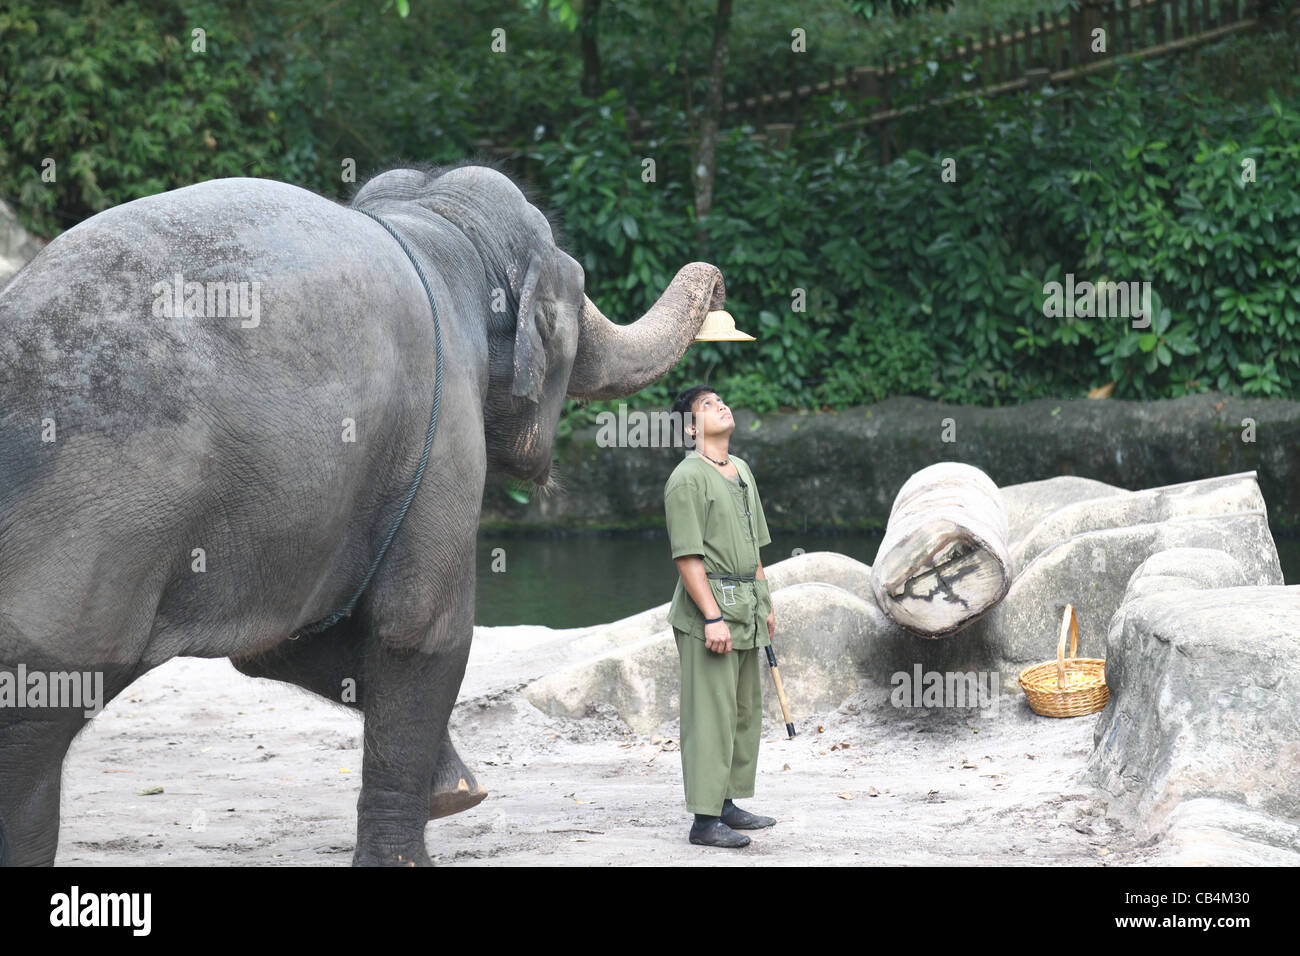 Elephant taking a hat off a man at the Singapore Zoo Stock Photo